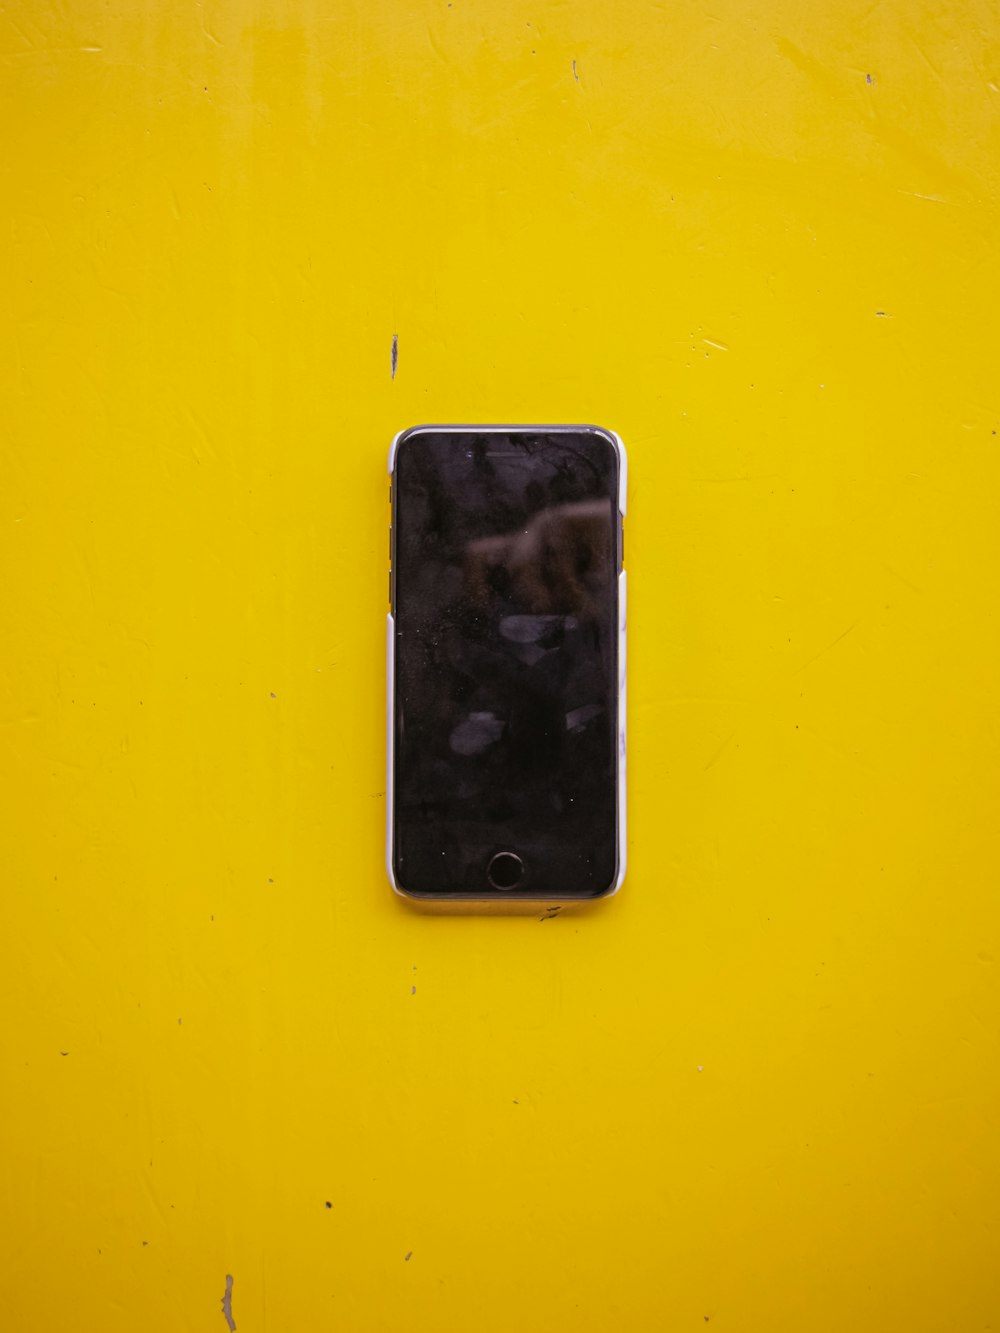 silver iPhone 5 on yellow surface